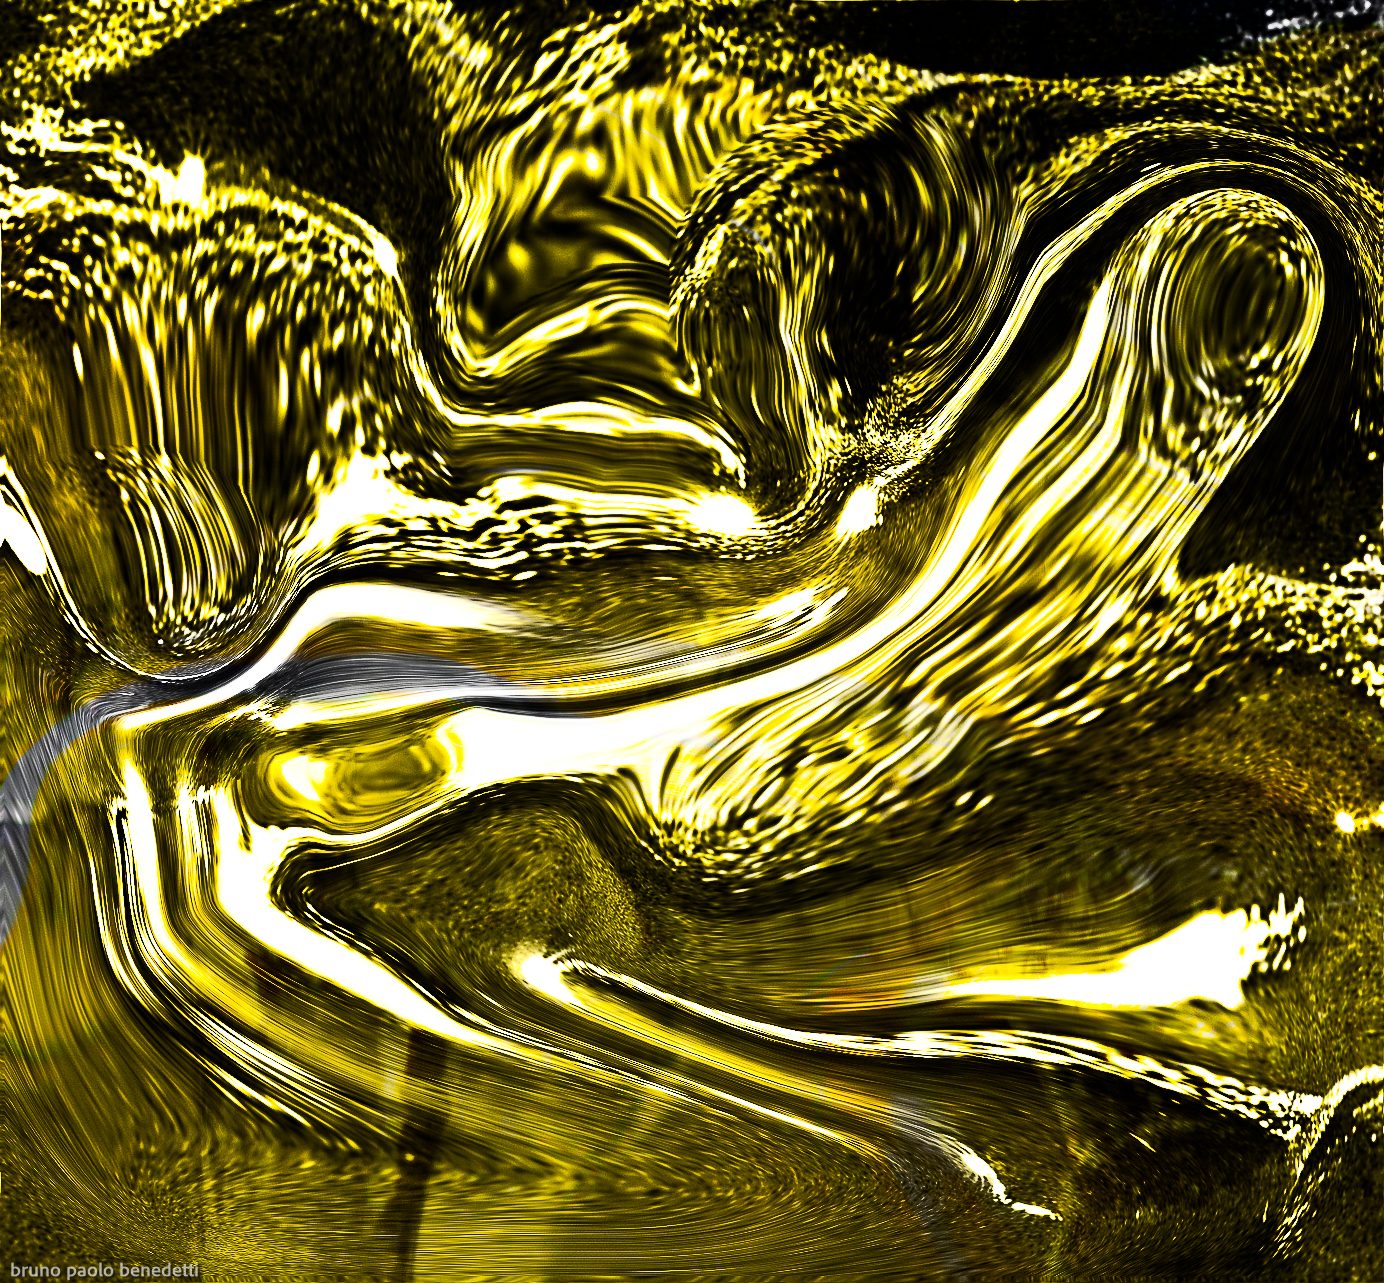 reflections of light on dynamic fluid background of dominant olive color give a sense of calm and positivity